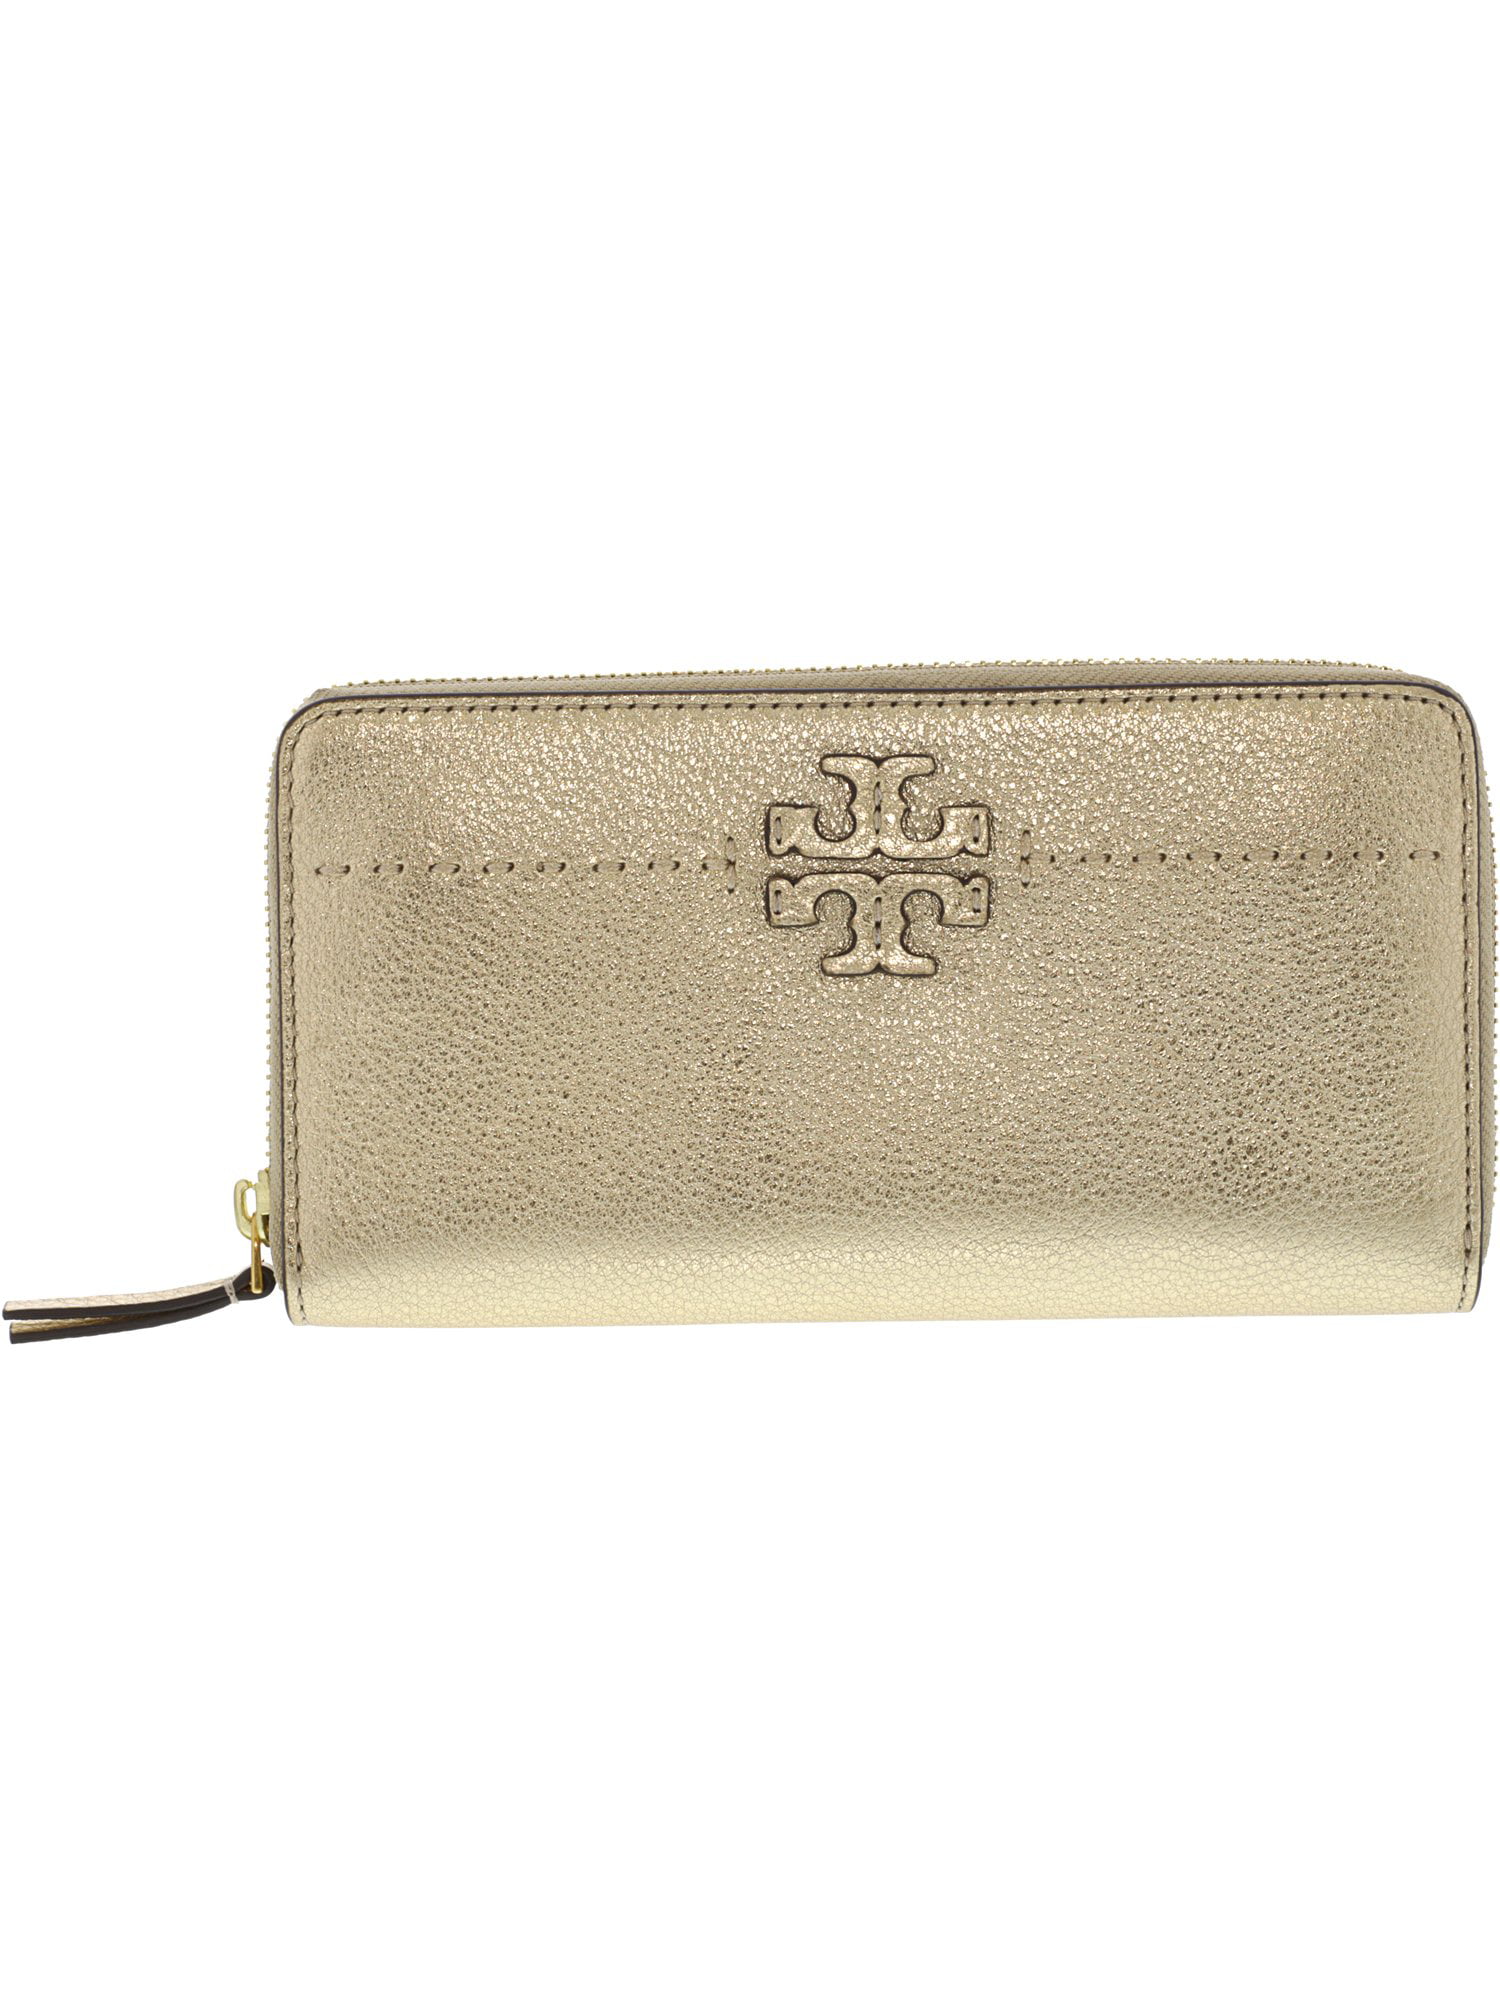 Tory Burch Women's Mcgraw Zip Continental Leather Wallet - Gold -  